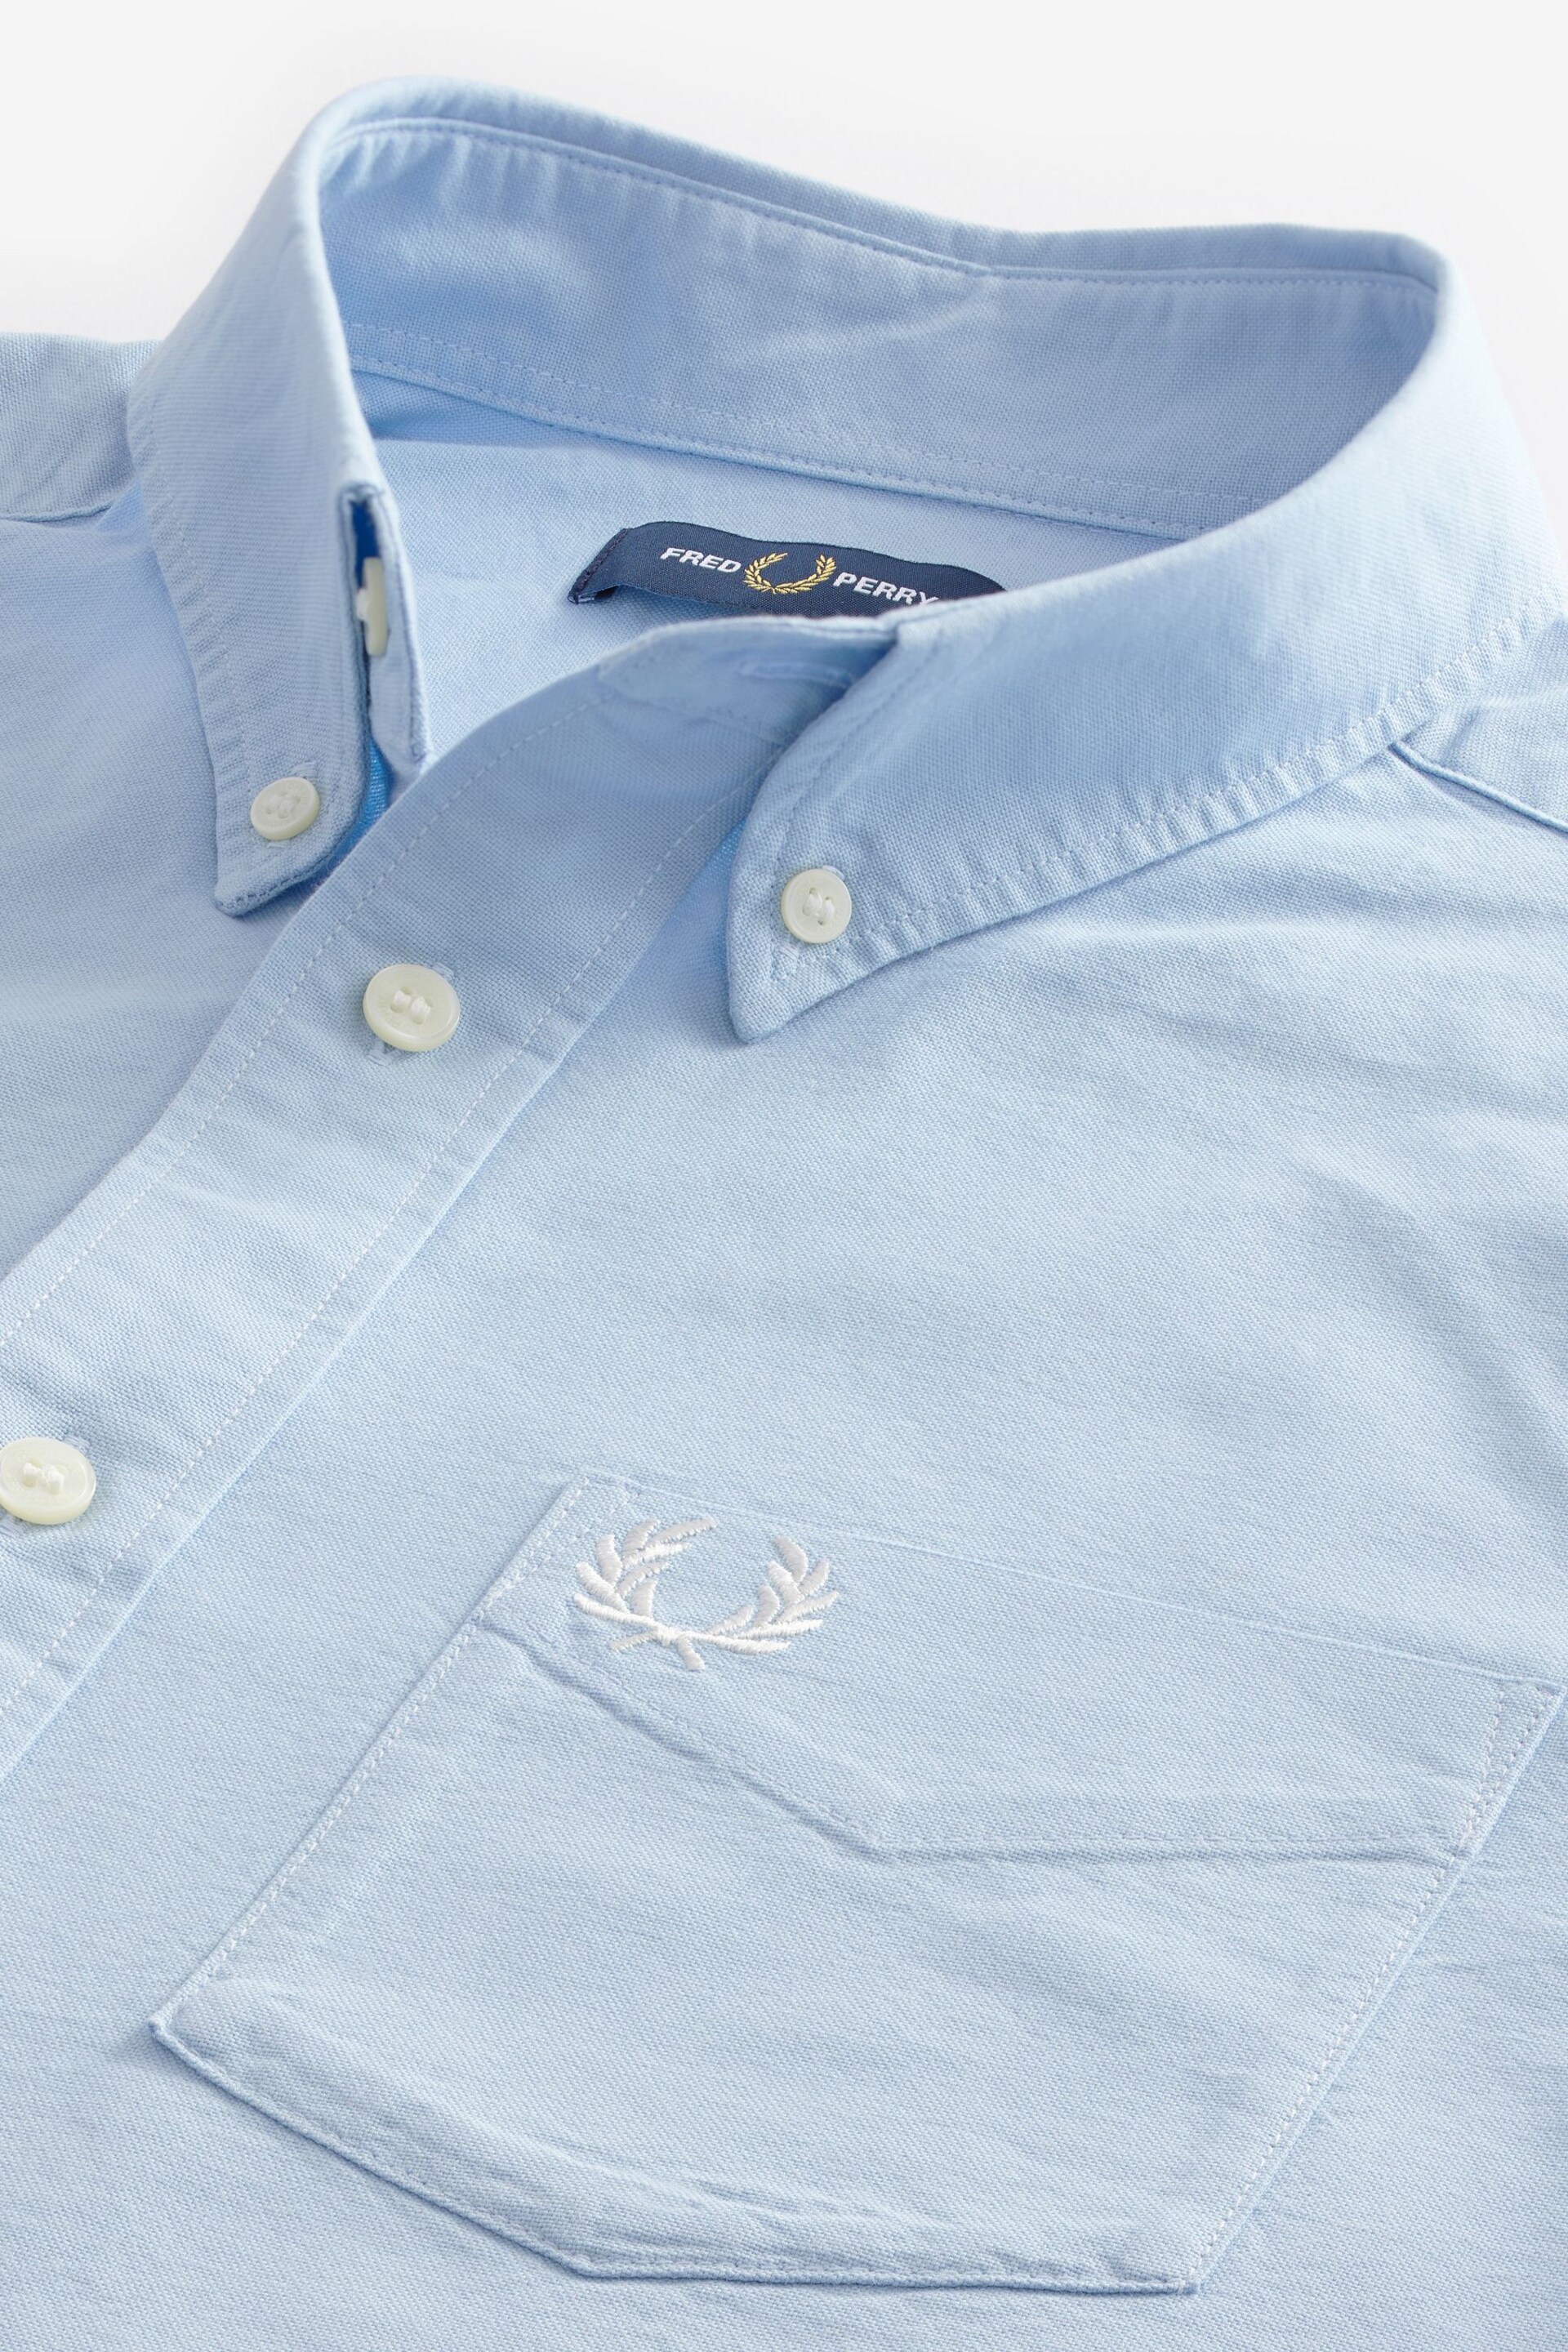 Fred Perry Oxford Shirt - Image 8 of 9